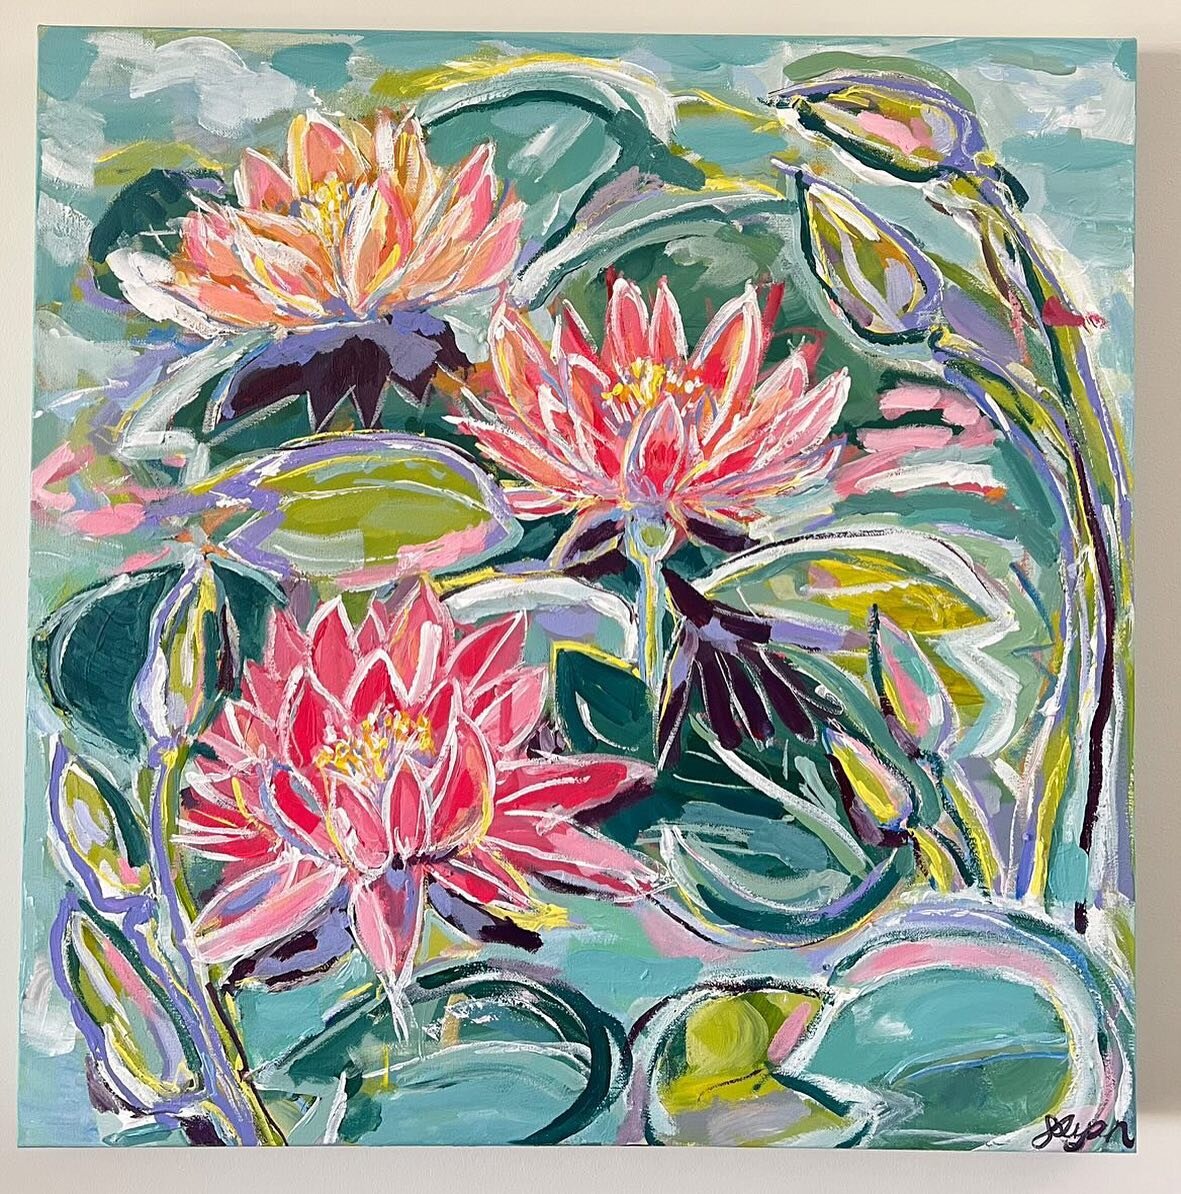 We&rsquo;re excited to share &lsquo;Water lilies&rsquo; by Canberra artist @the_colour_of_sophie_ 🌸🌼🌸🌼🌸

Inspired by the beautiful water lilies near her home, Sophie&rsquo;s painting captures the peacefulness of nature.

Size: 60cm x 60cm

Now a